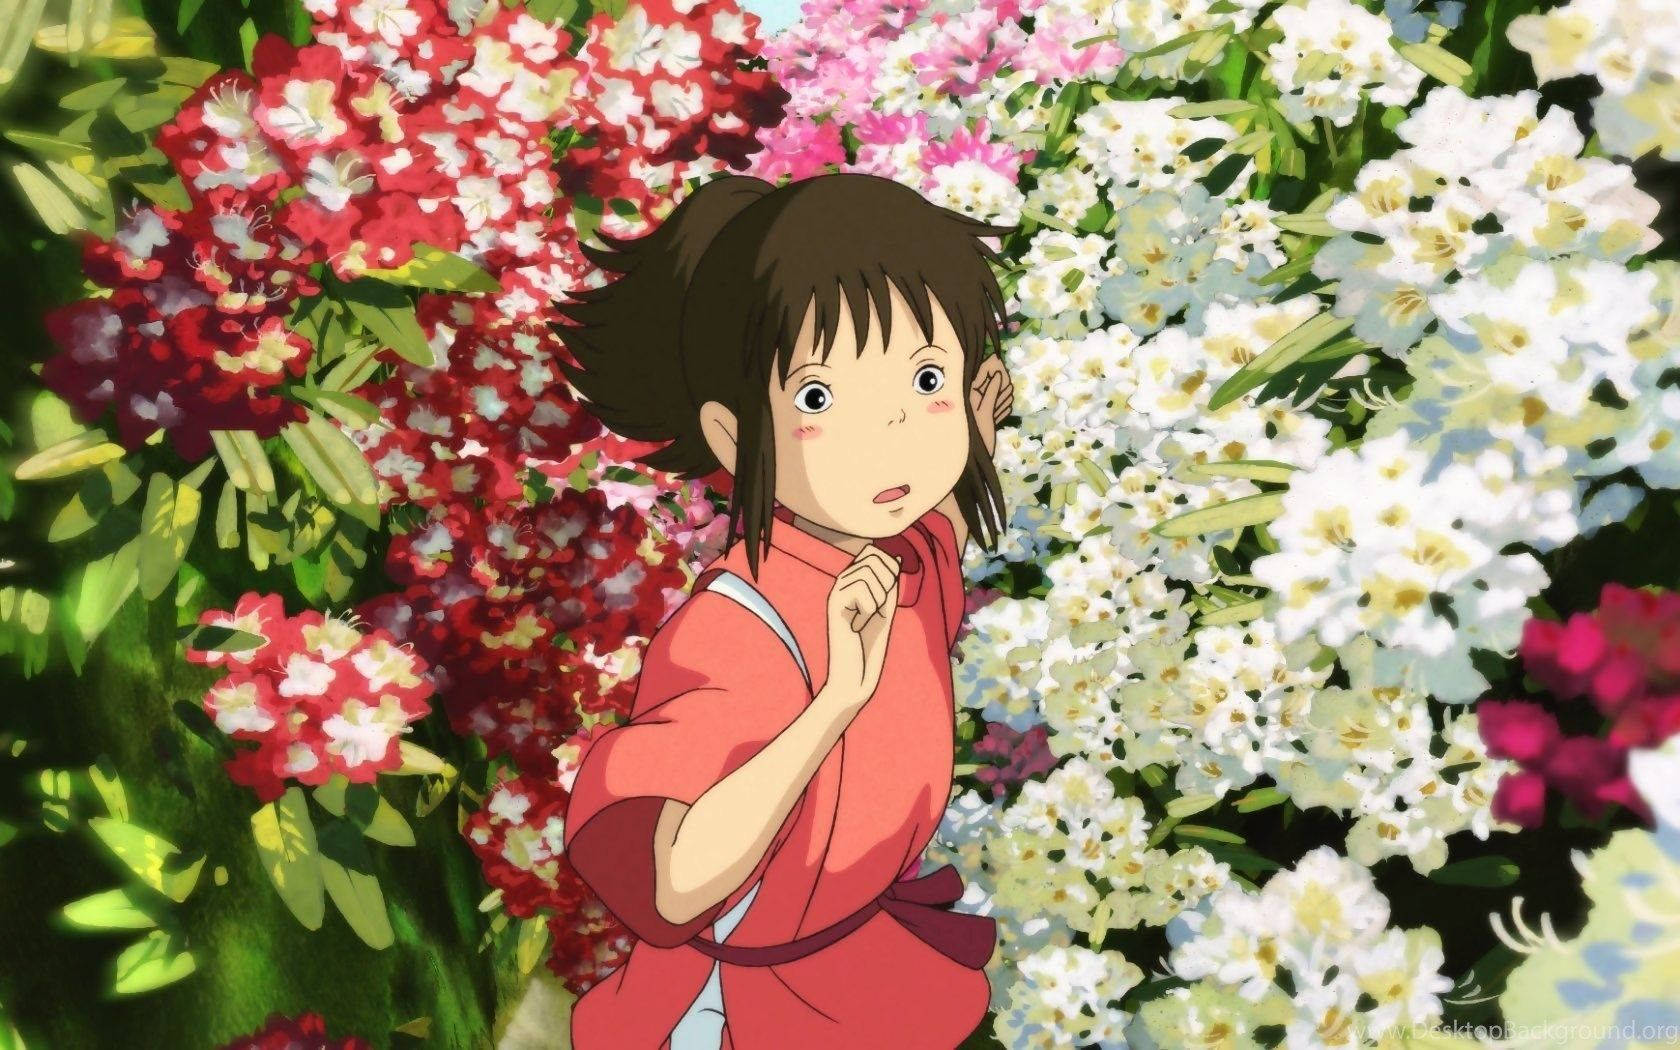 Take the plunge with Chihiro and reveal the magical world of Studio Ghibli Wallpaper